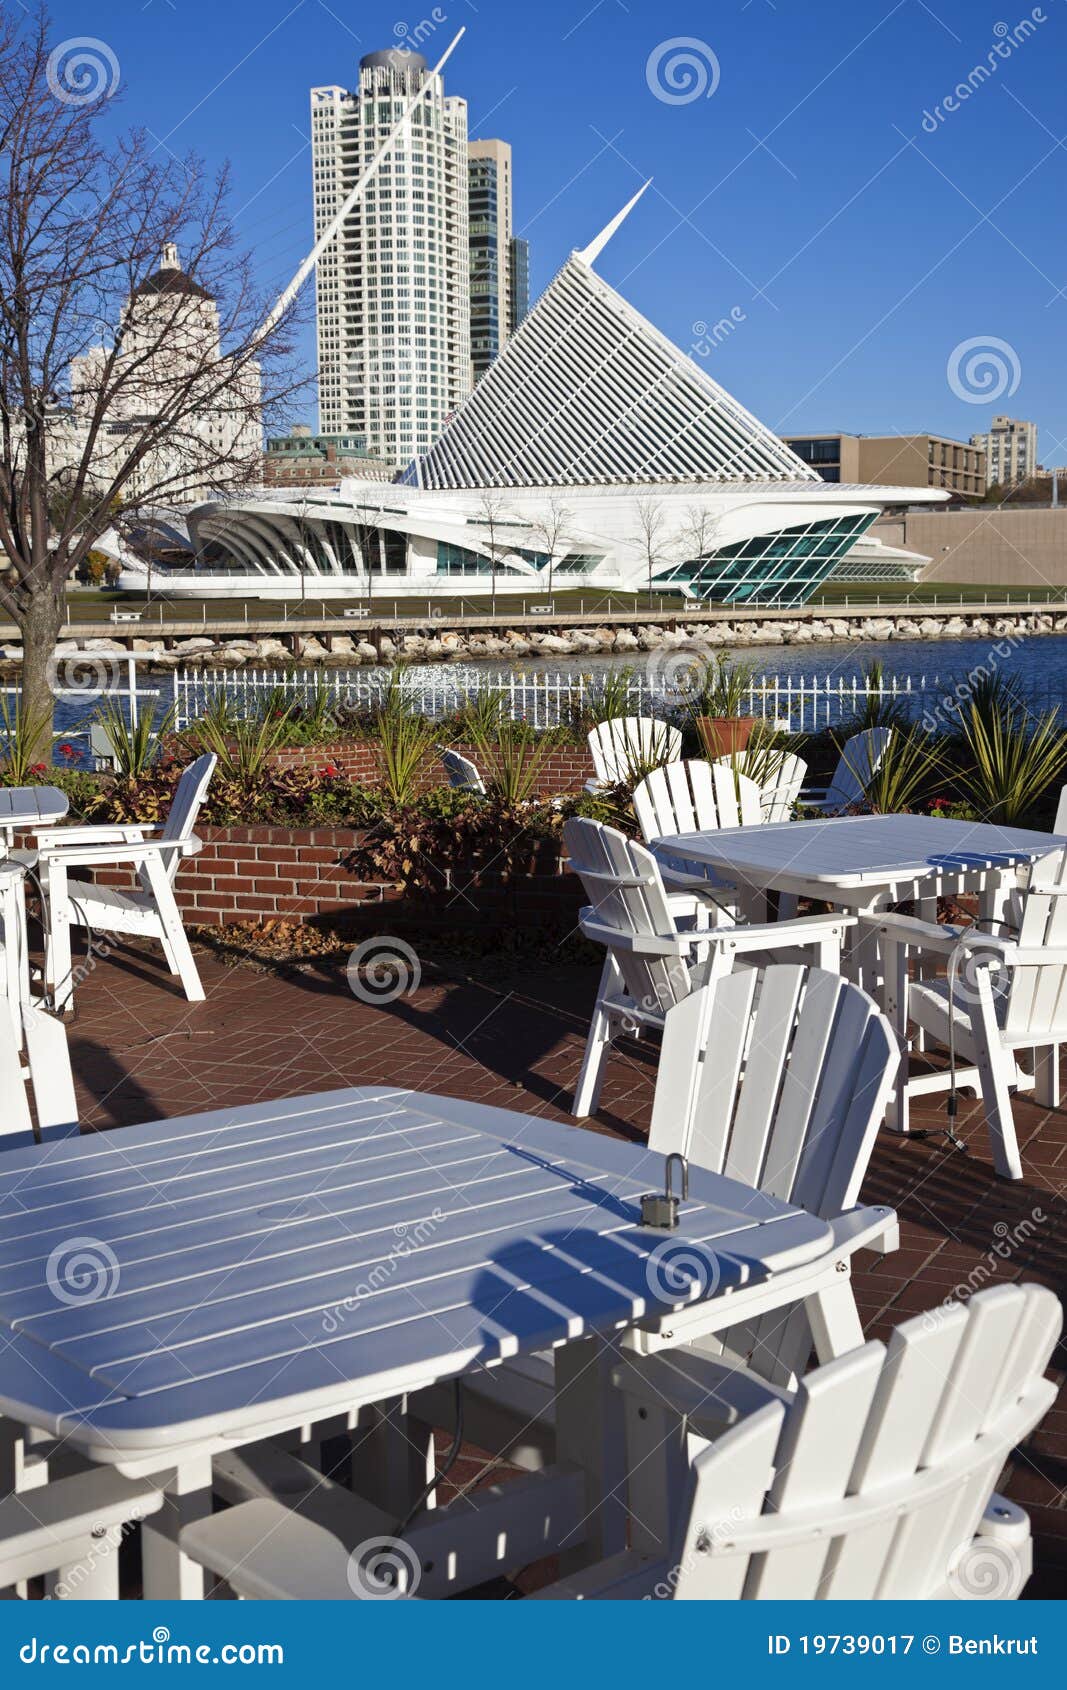 Lakefront Restaurant in Milwaukee Editorial Photography - Image of